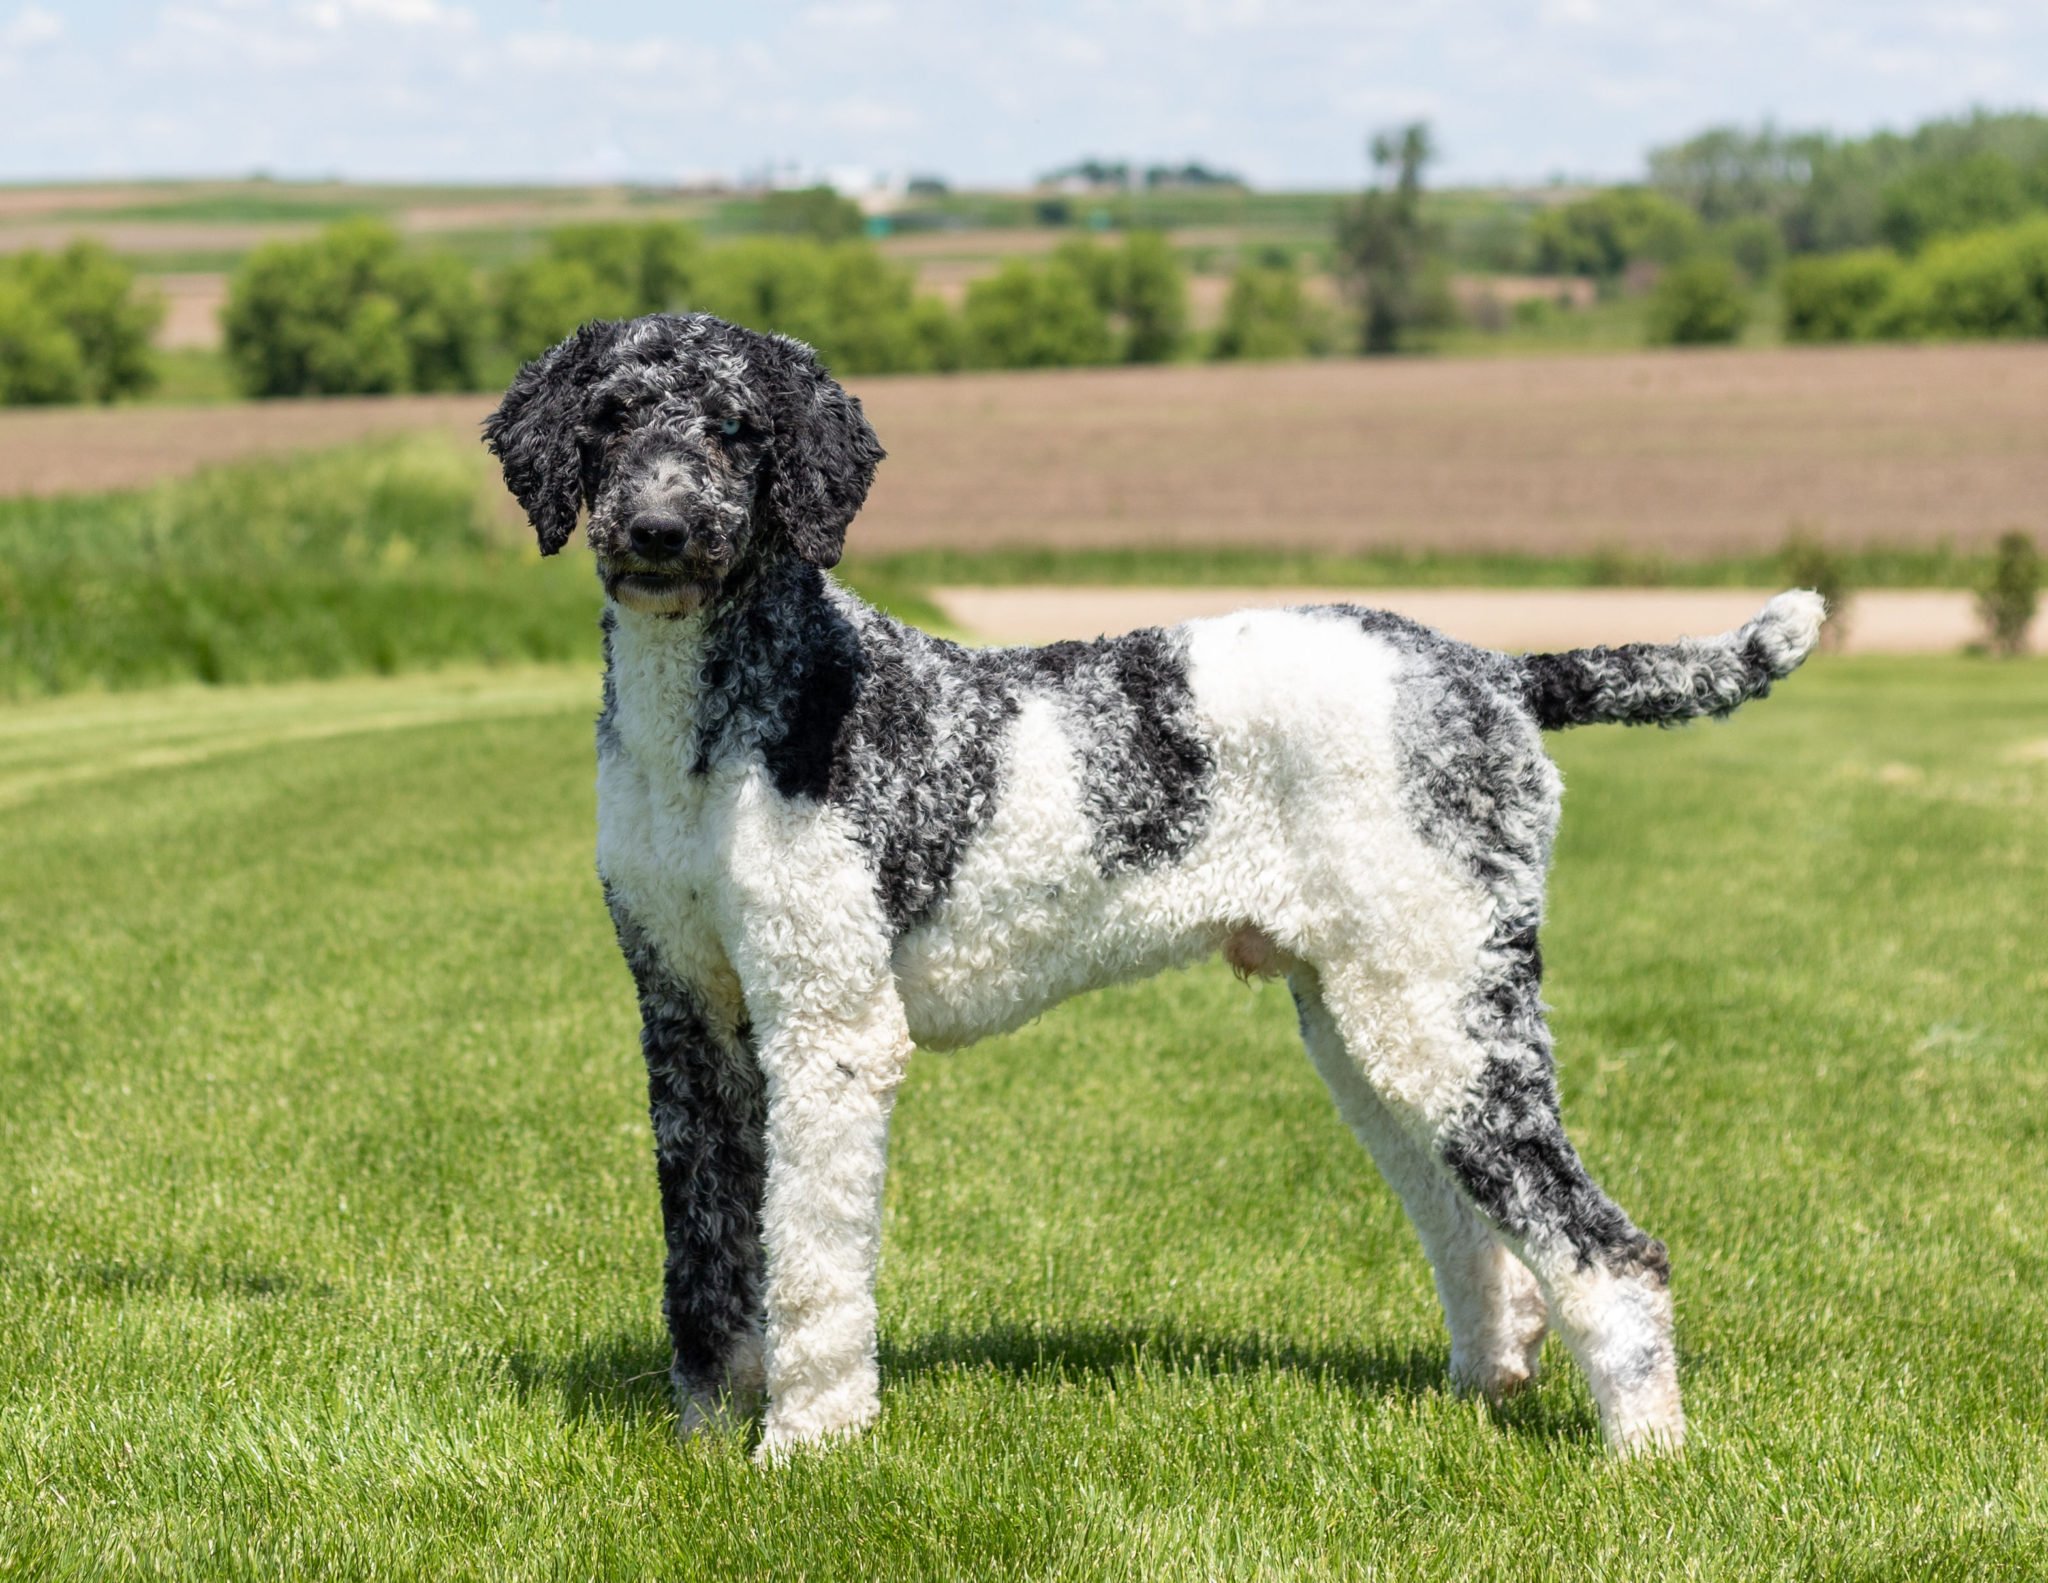 A litter of Mini Irish Doodles raised in Iowa by Poodles 2 Doodles